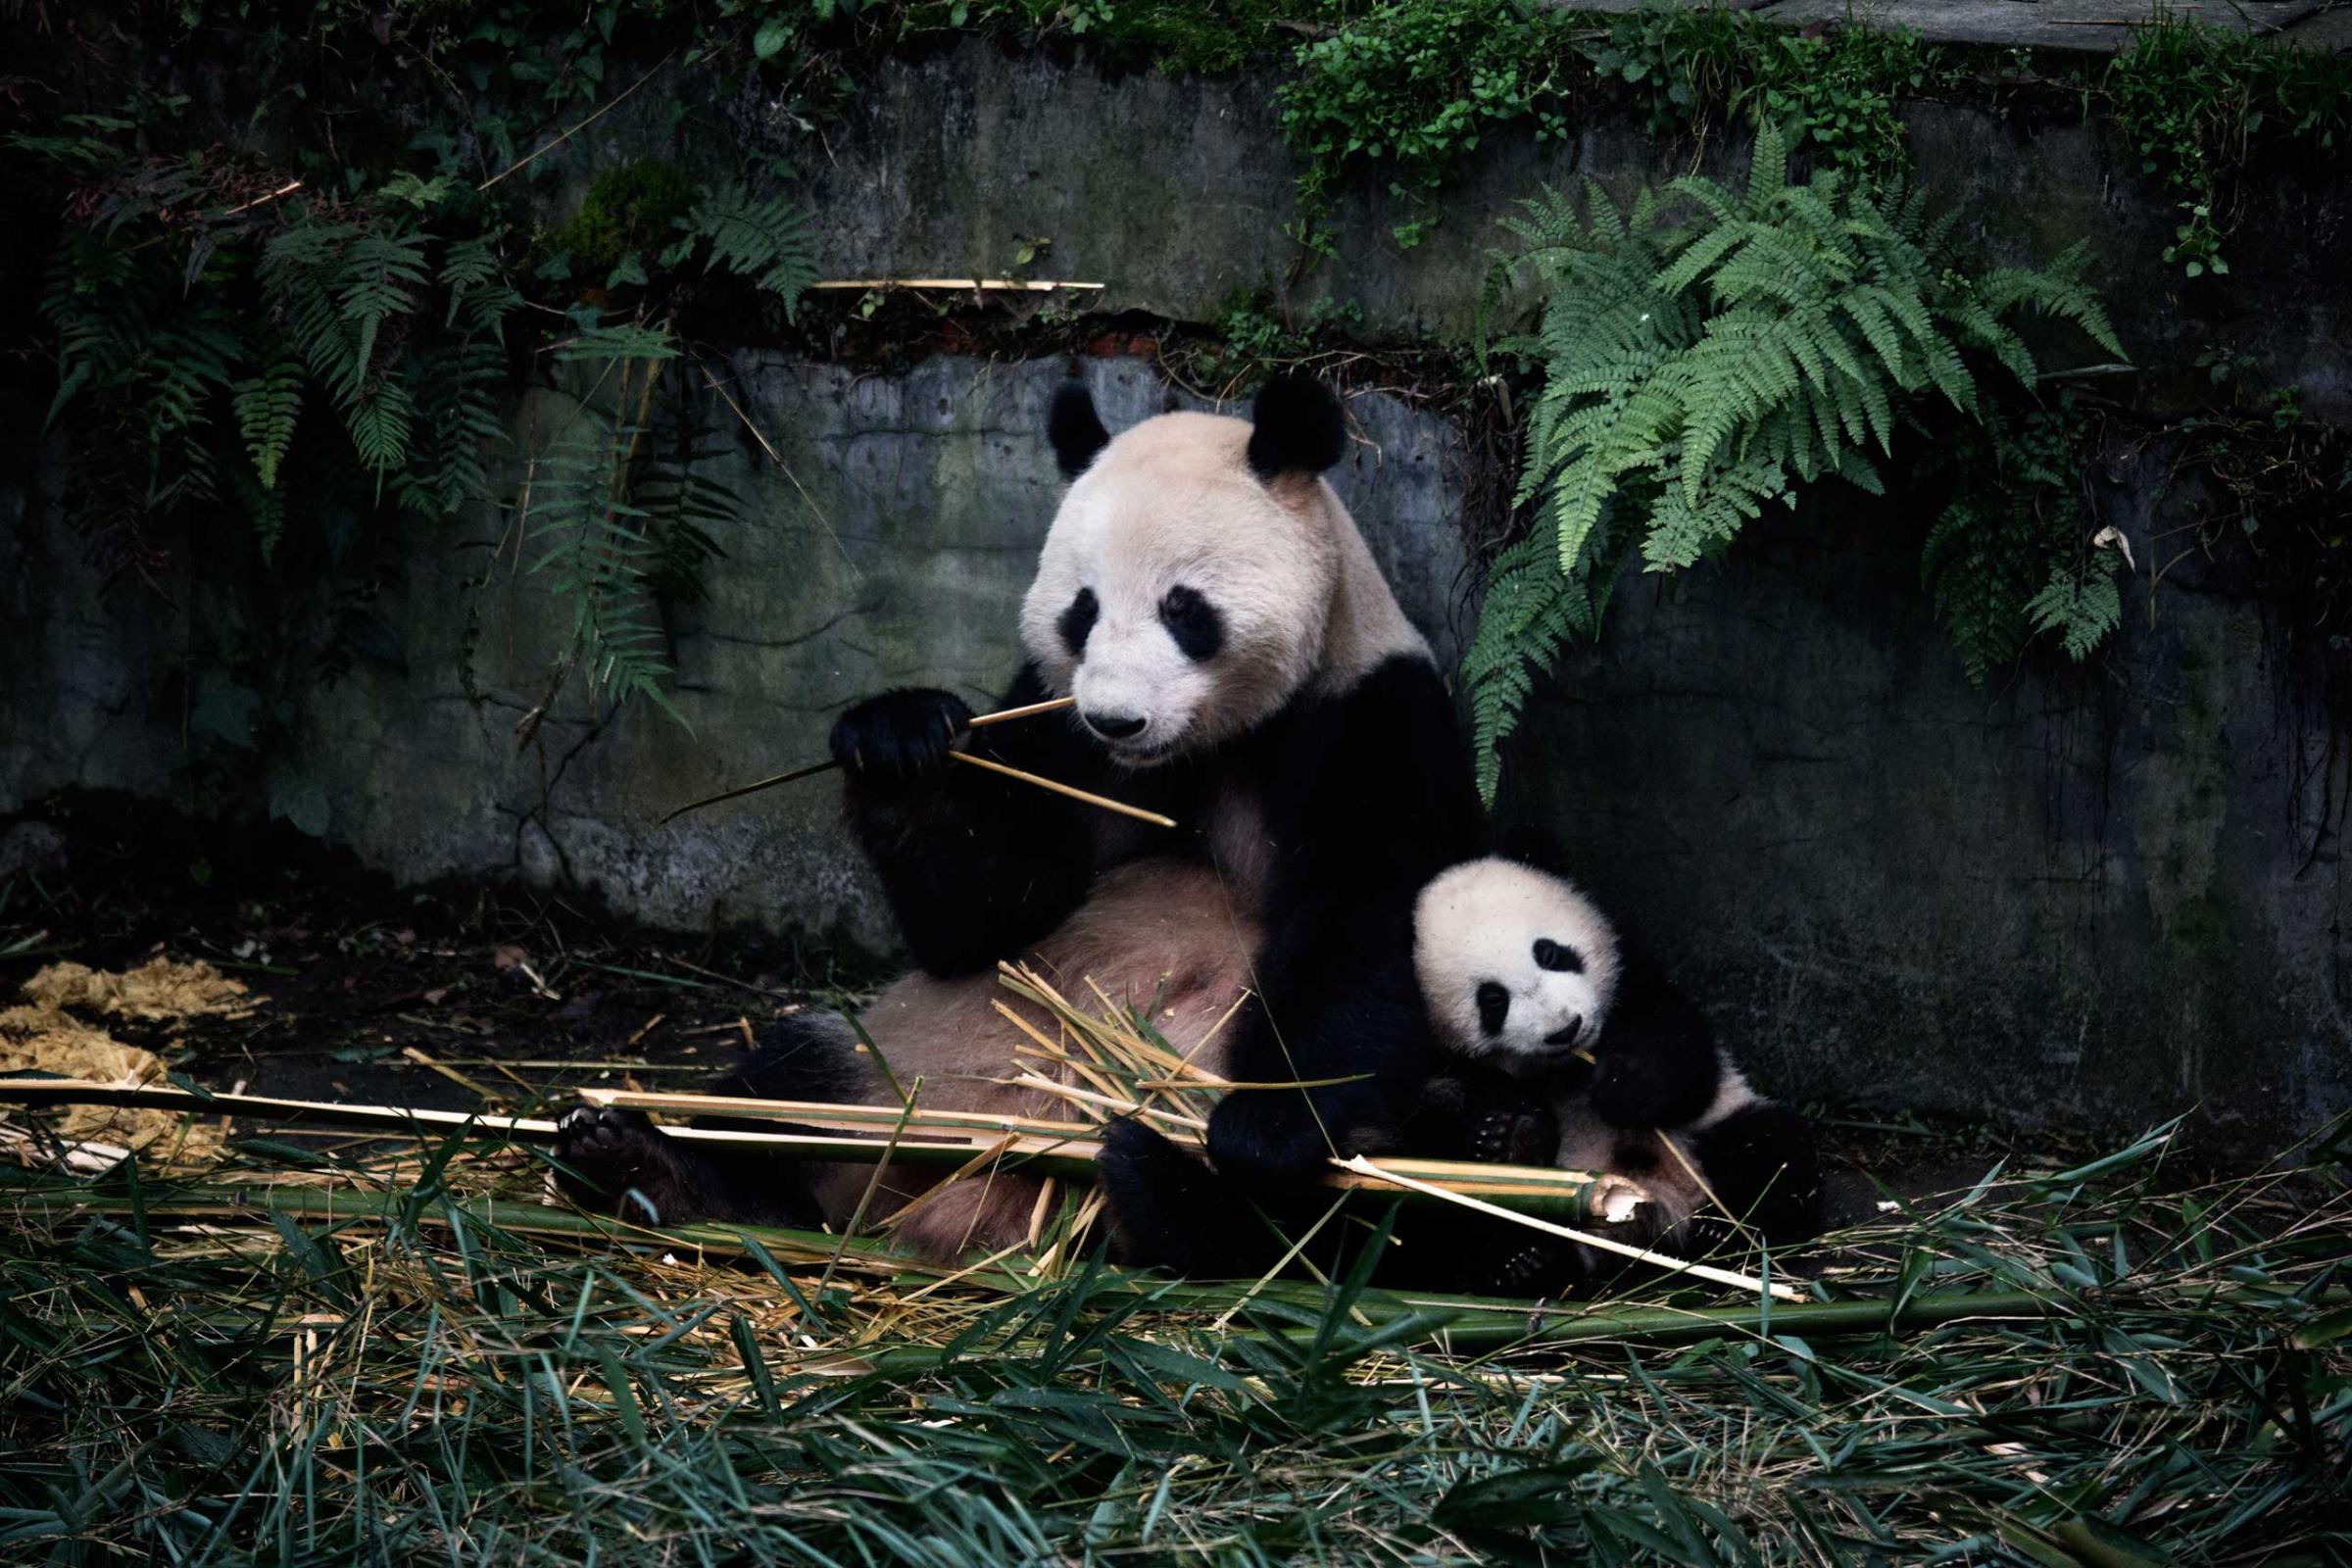 A panda and her baby eat bamboo in their enclosure at the Bifengxia Panda Base in Ya'an, Sichuan Province, China, Dec. 3, 2015.